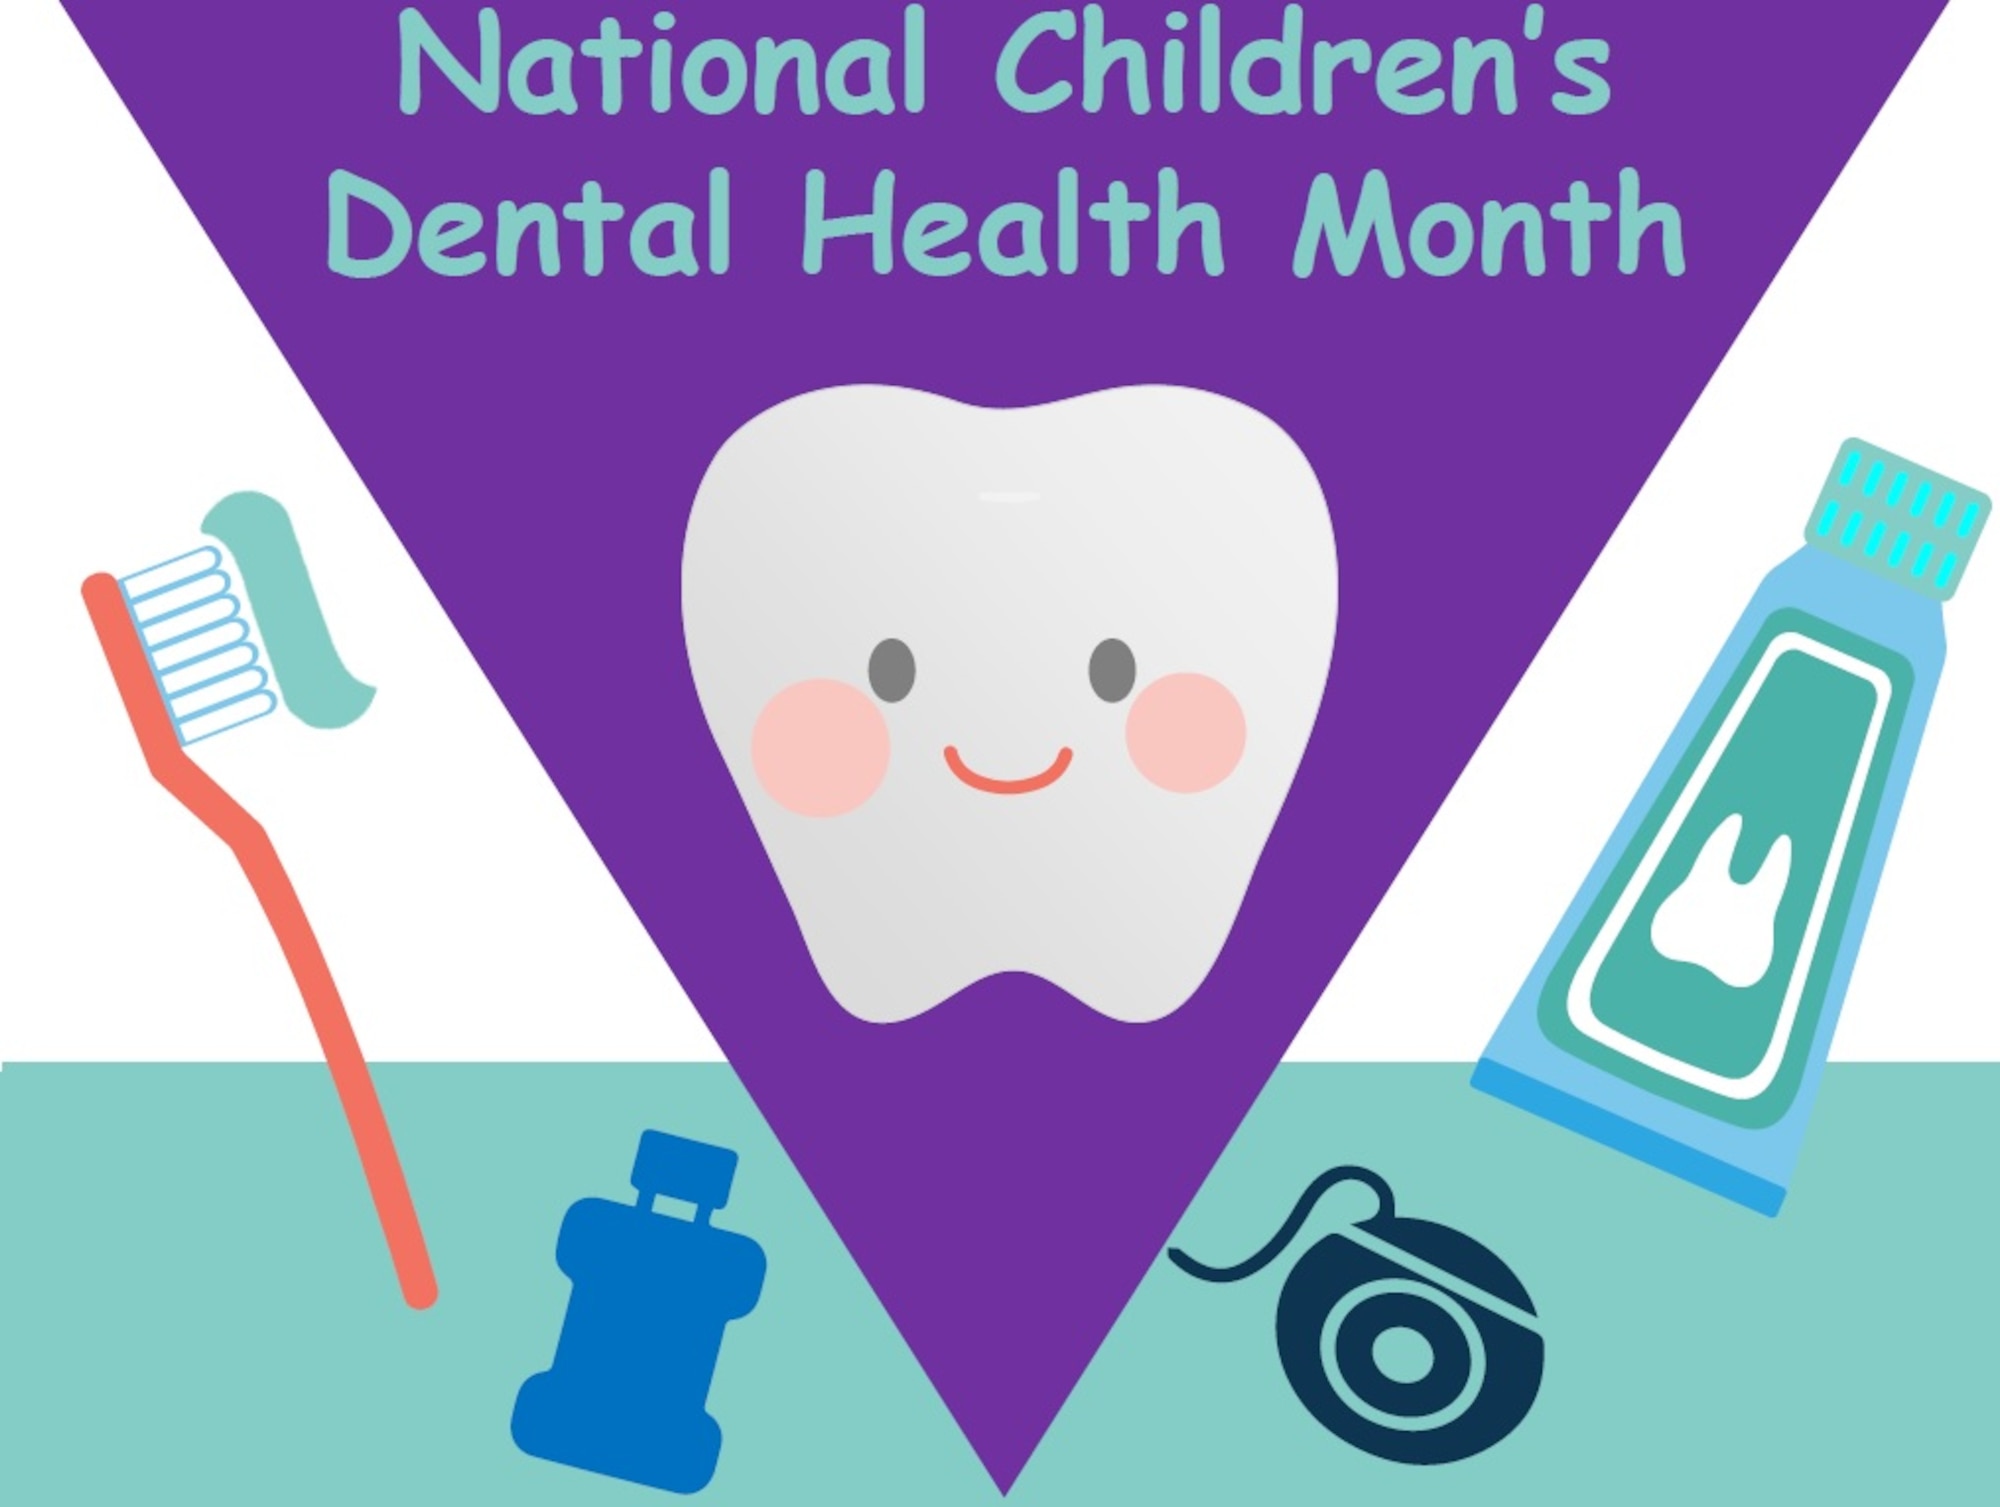 A graphic depicting National Children's Dental Health Month